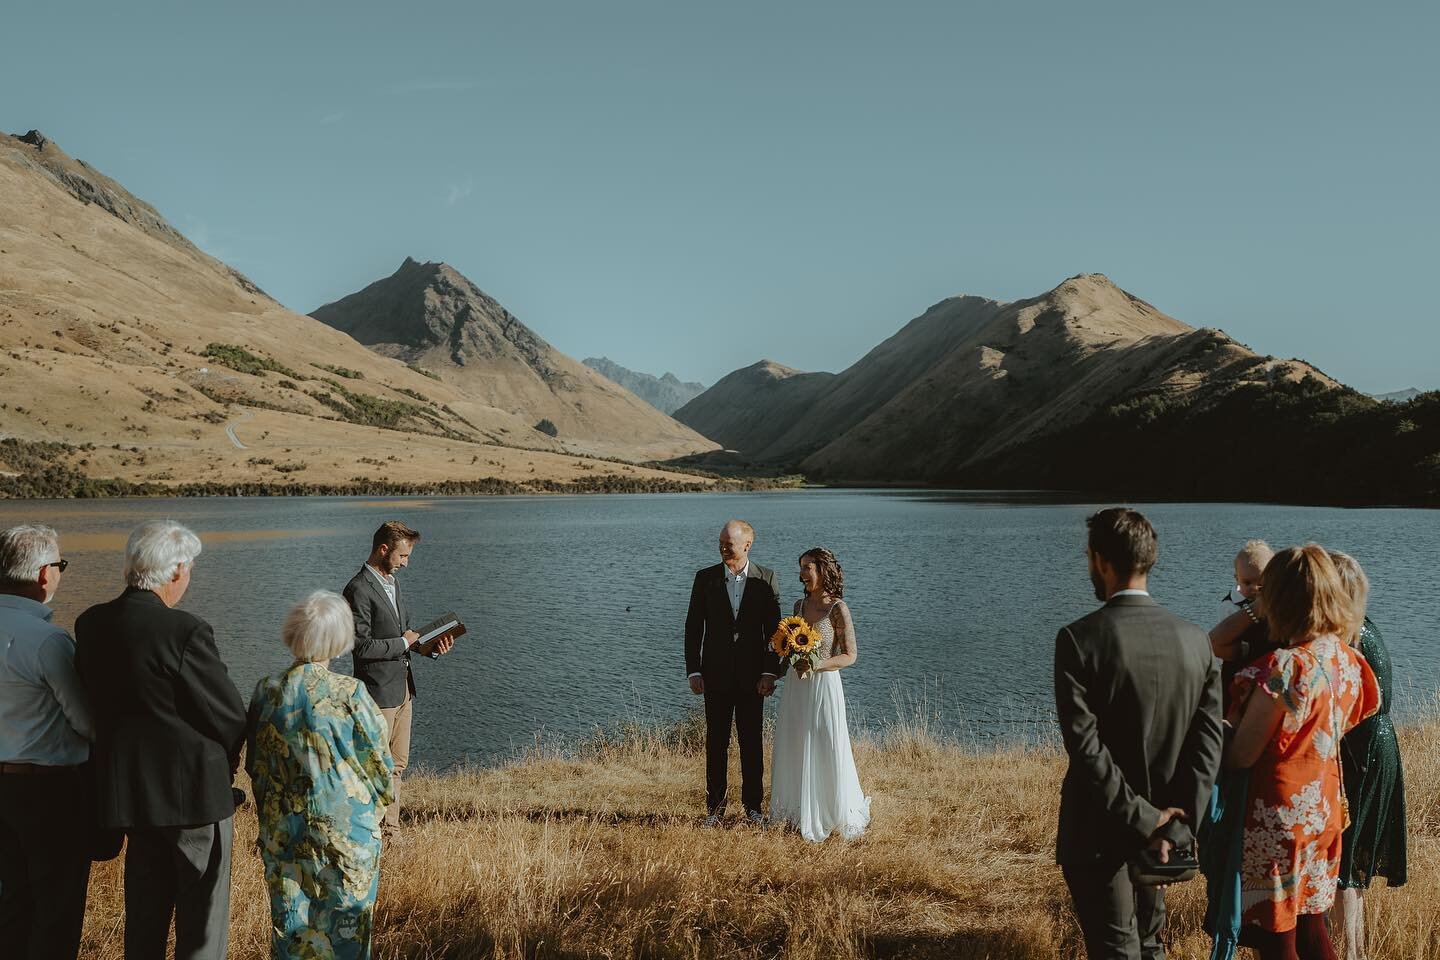 Every now and then I can&rsquo;t help but reflect on the fact that many of the settings where I now have the pleasure of officiating weddings are also places that played an integral part in my upbringing here in the Whakatipu&hellip;

Take Moke Lake/